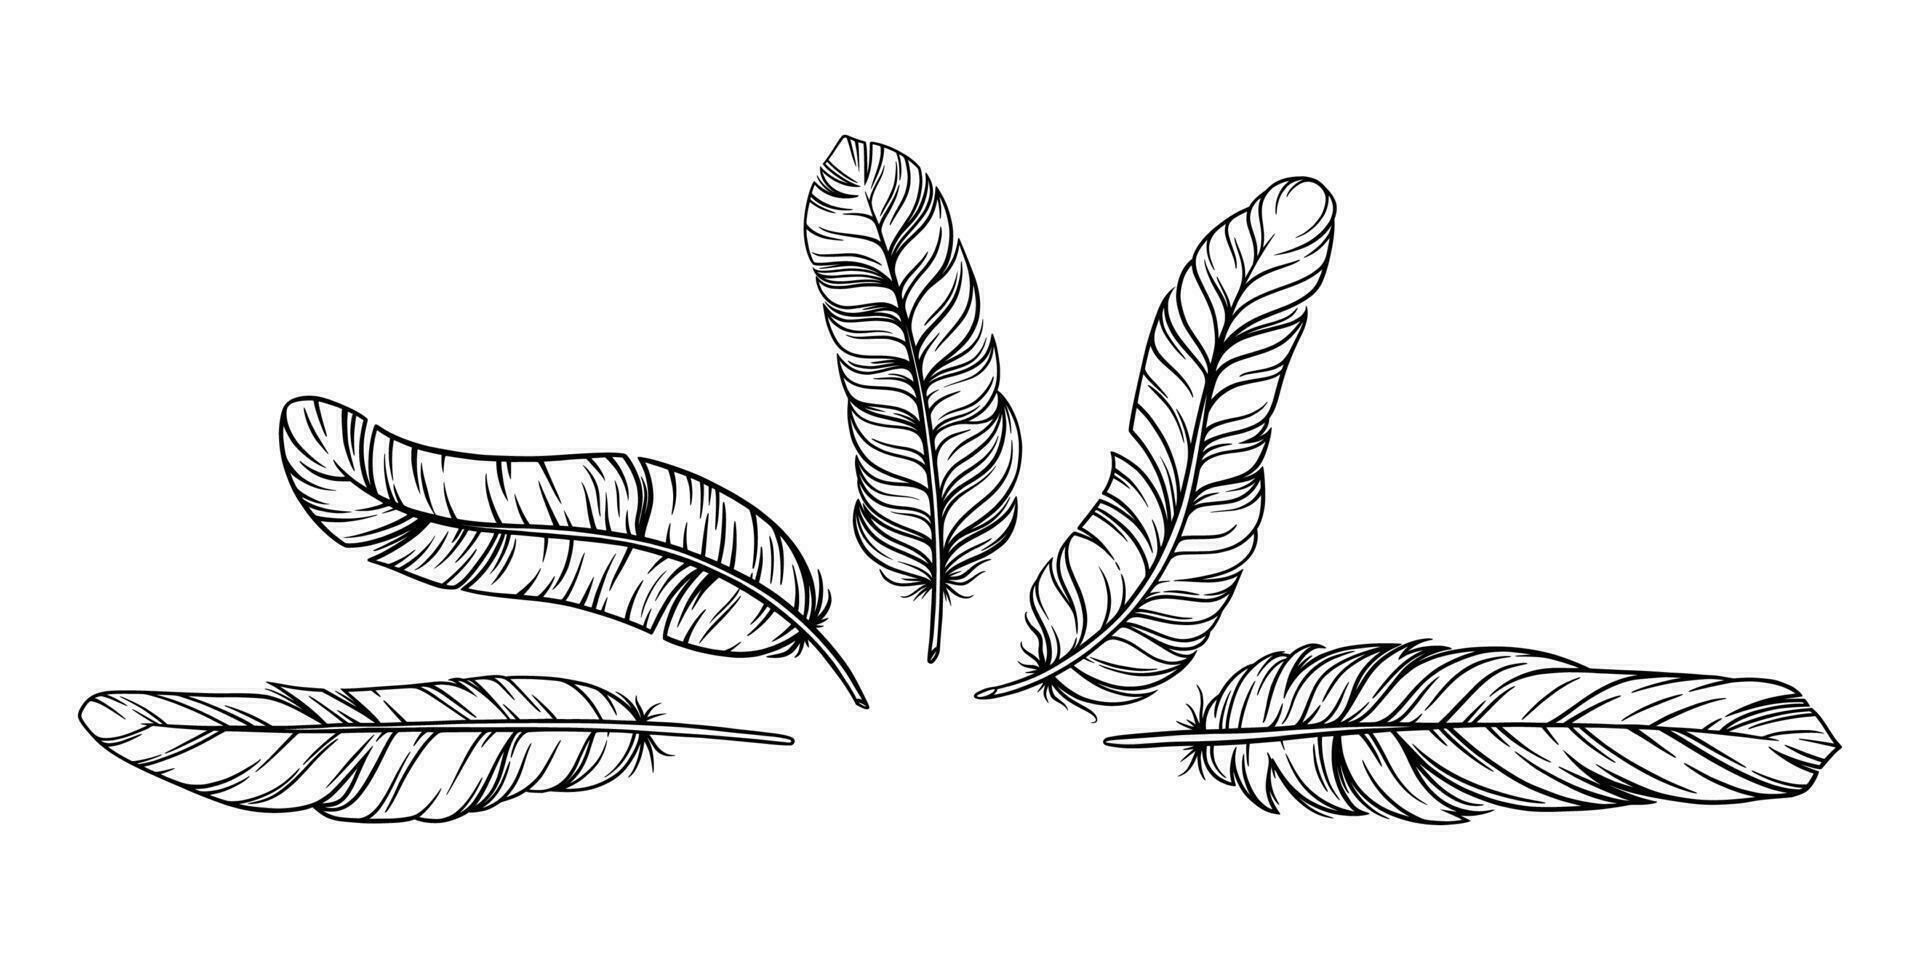 Feathers in boho vintage style. Set of tribal bird feathers isolated in white background. Vector illustration